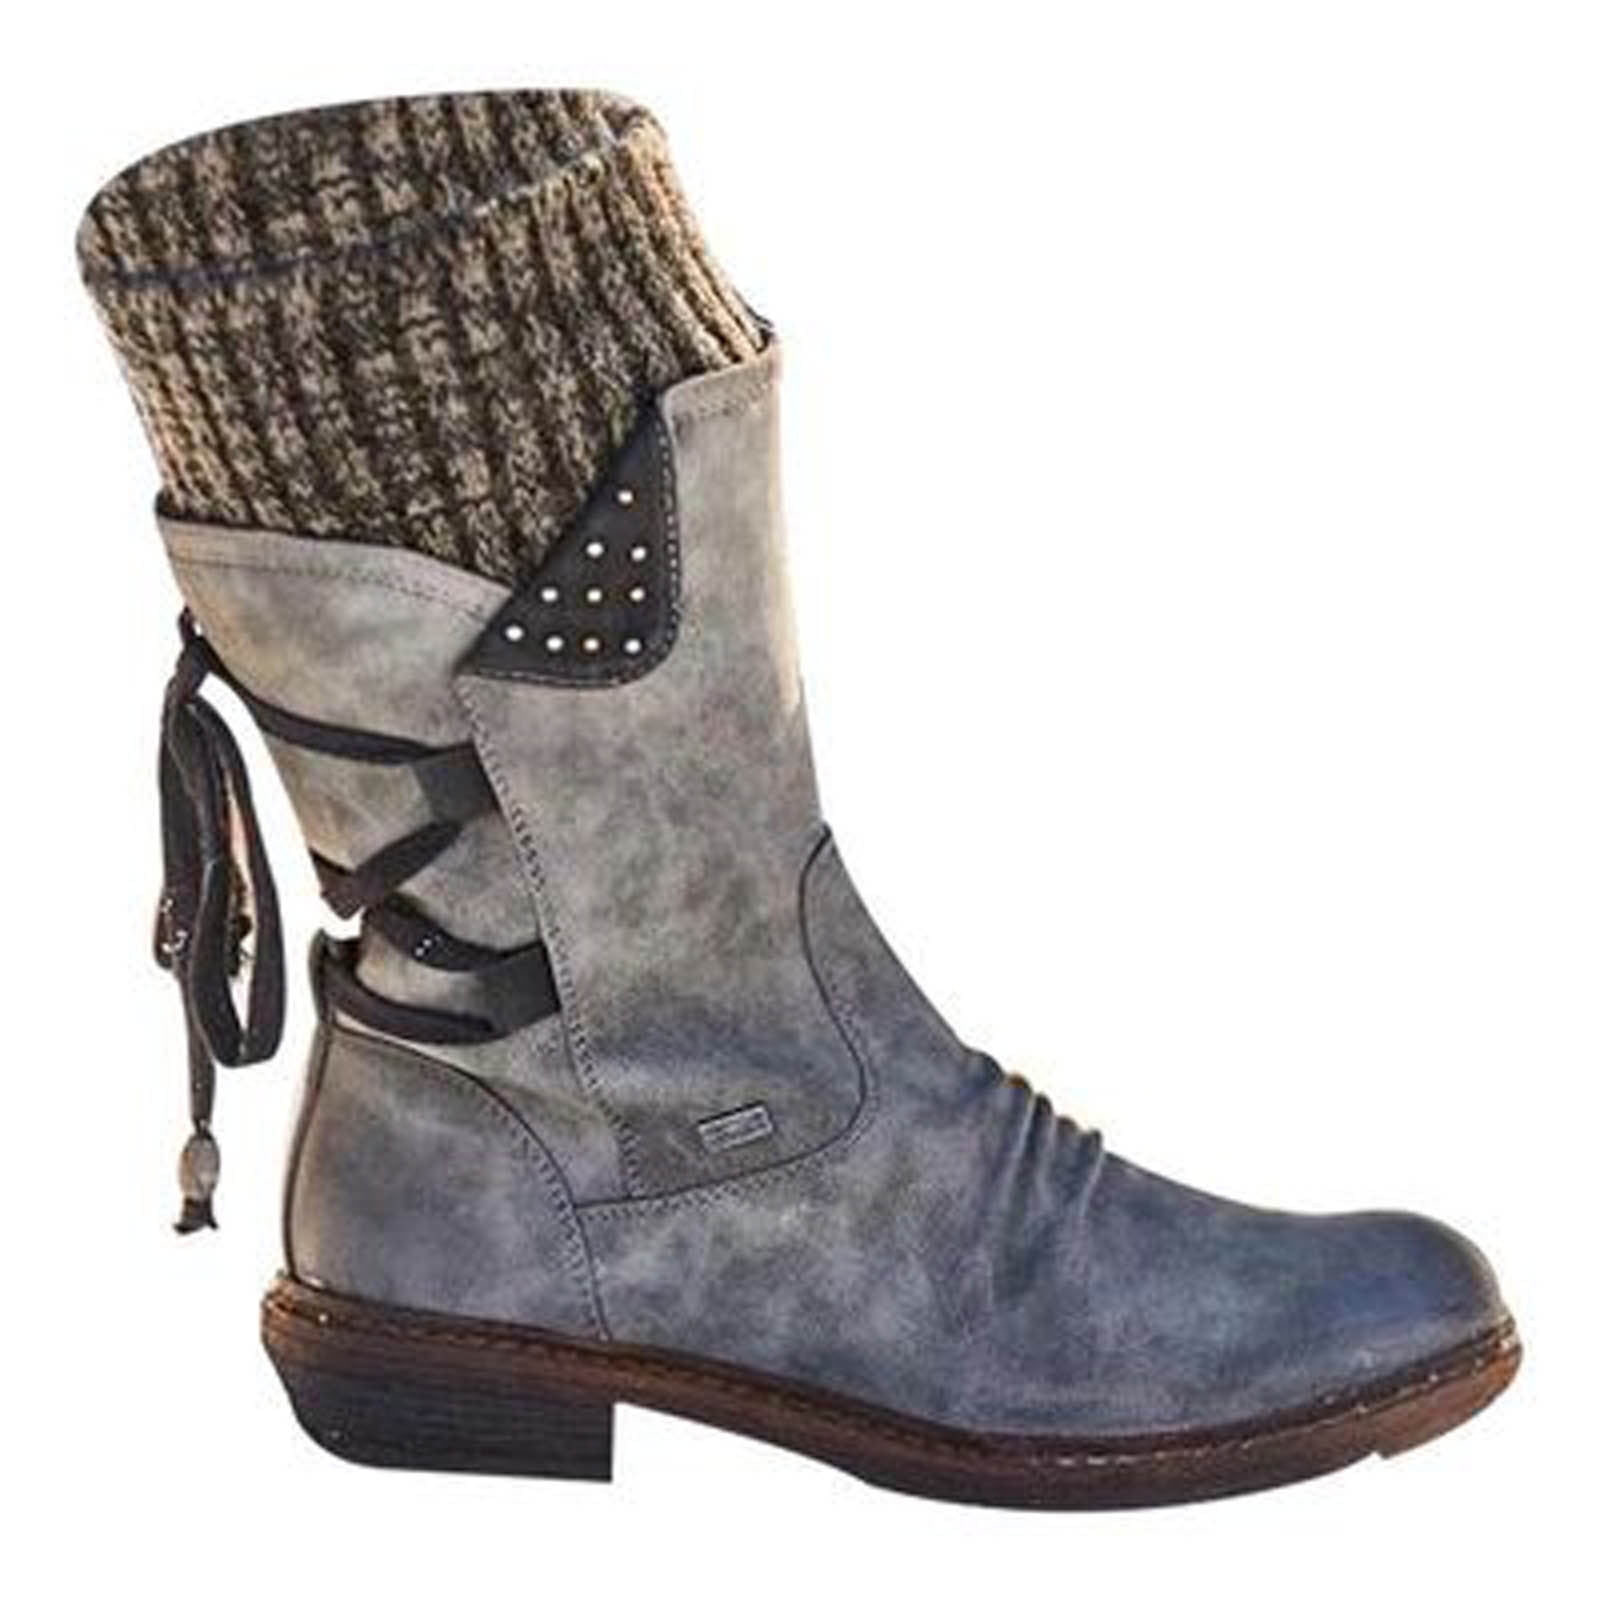 Multi-Colors Women's Mid-Calf Boots Winter Autumn Casual Lace Up High Top Shoes